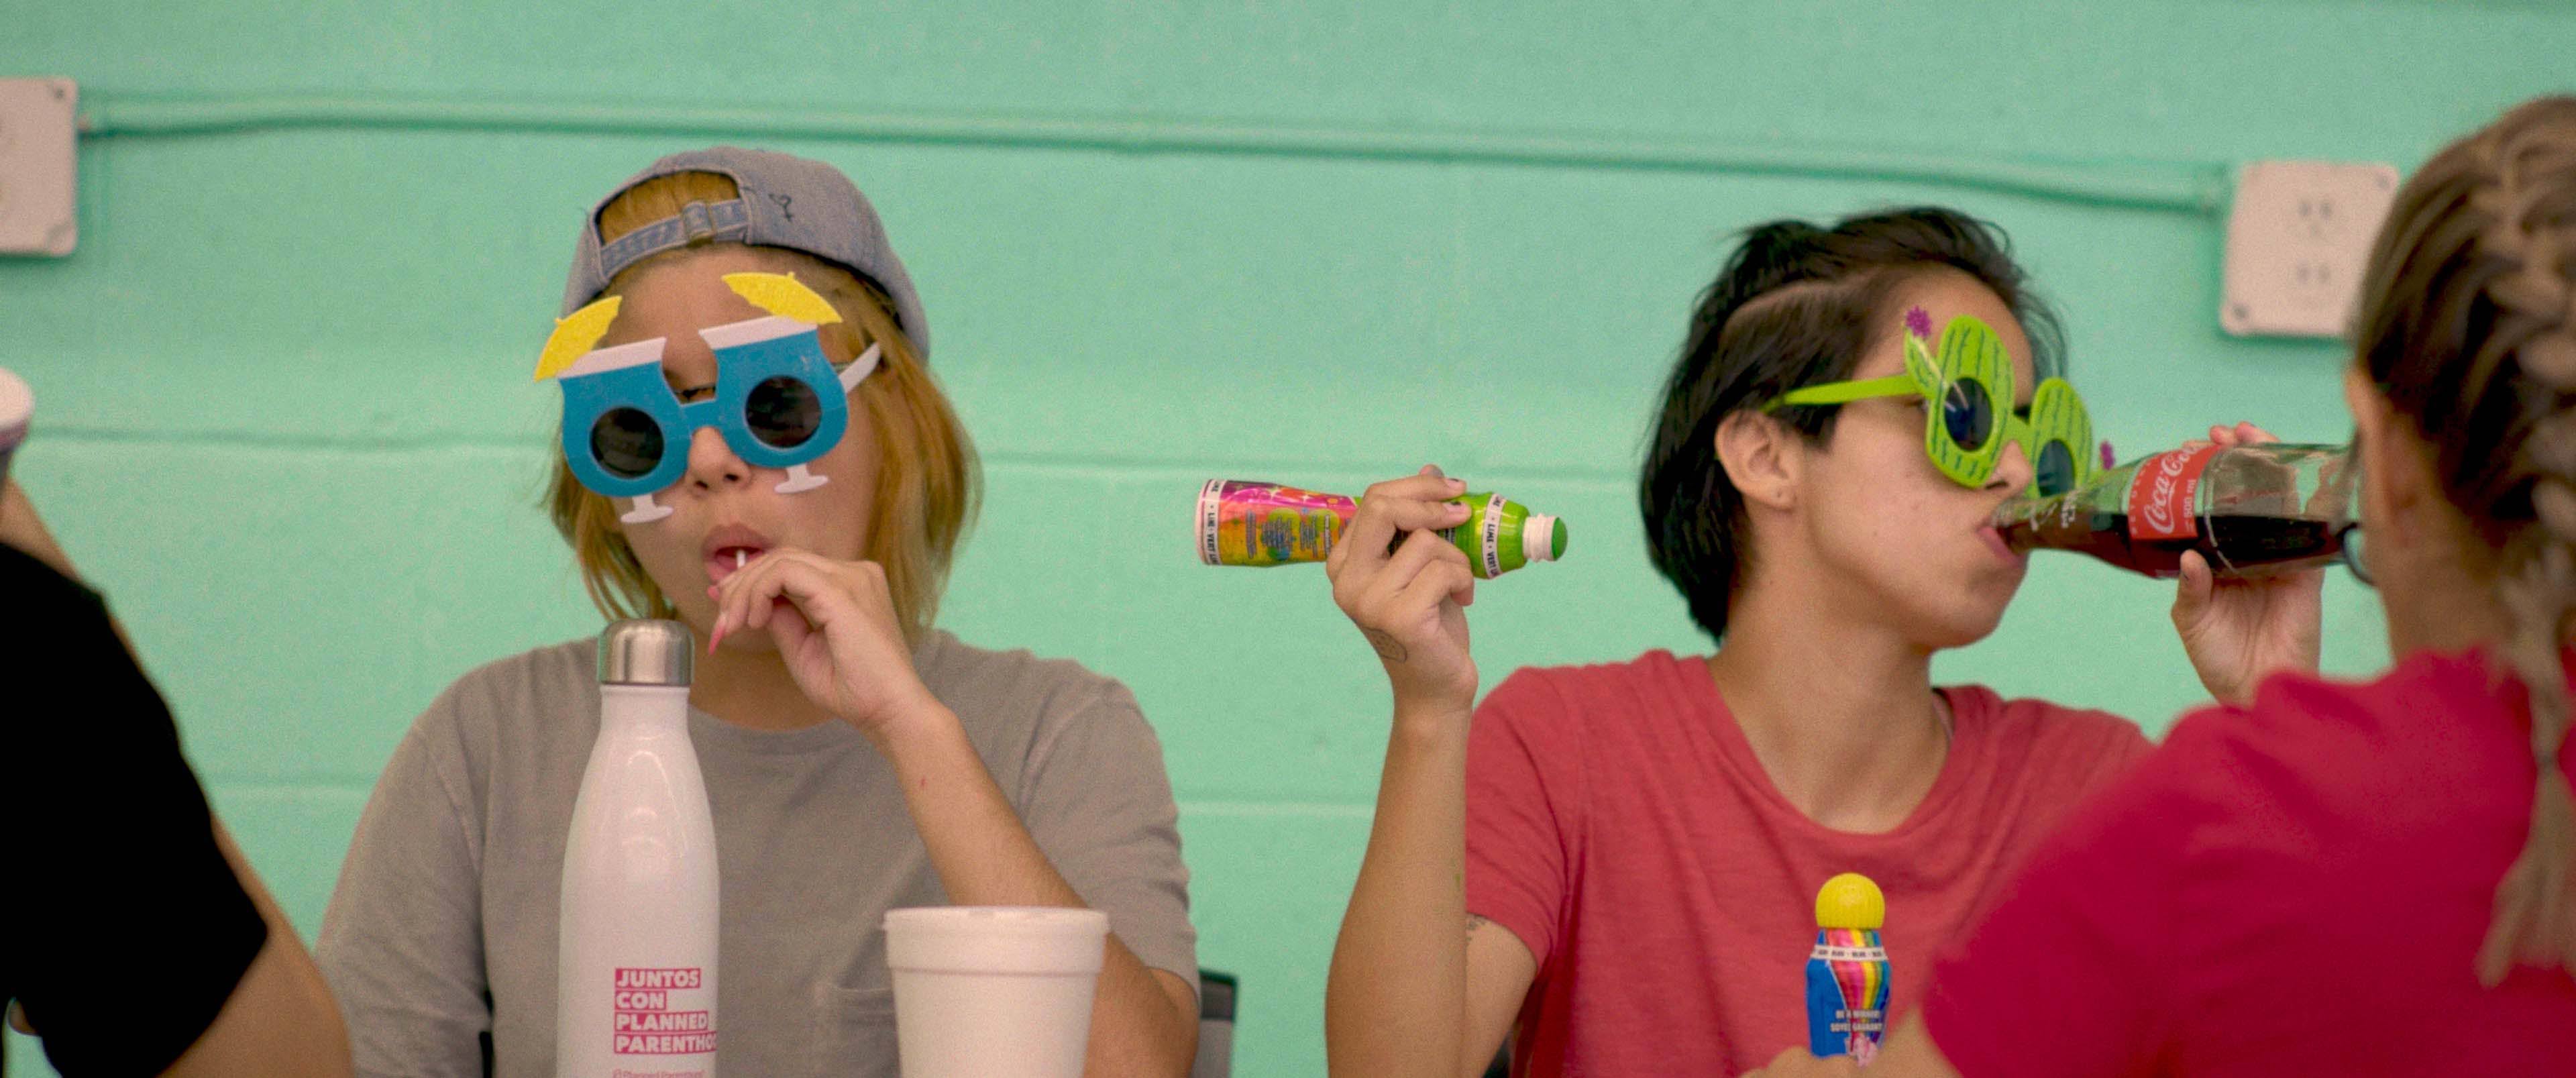 Two girls wearing odd shaped sunglasses are sitting together. The girl on the left enjoys a lollipop, while the girl on the right drinks a soda.